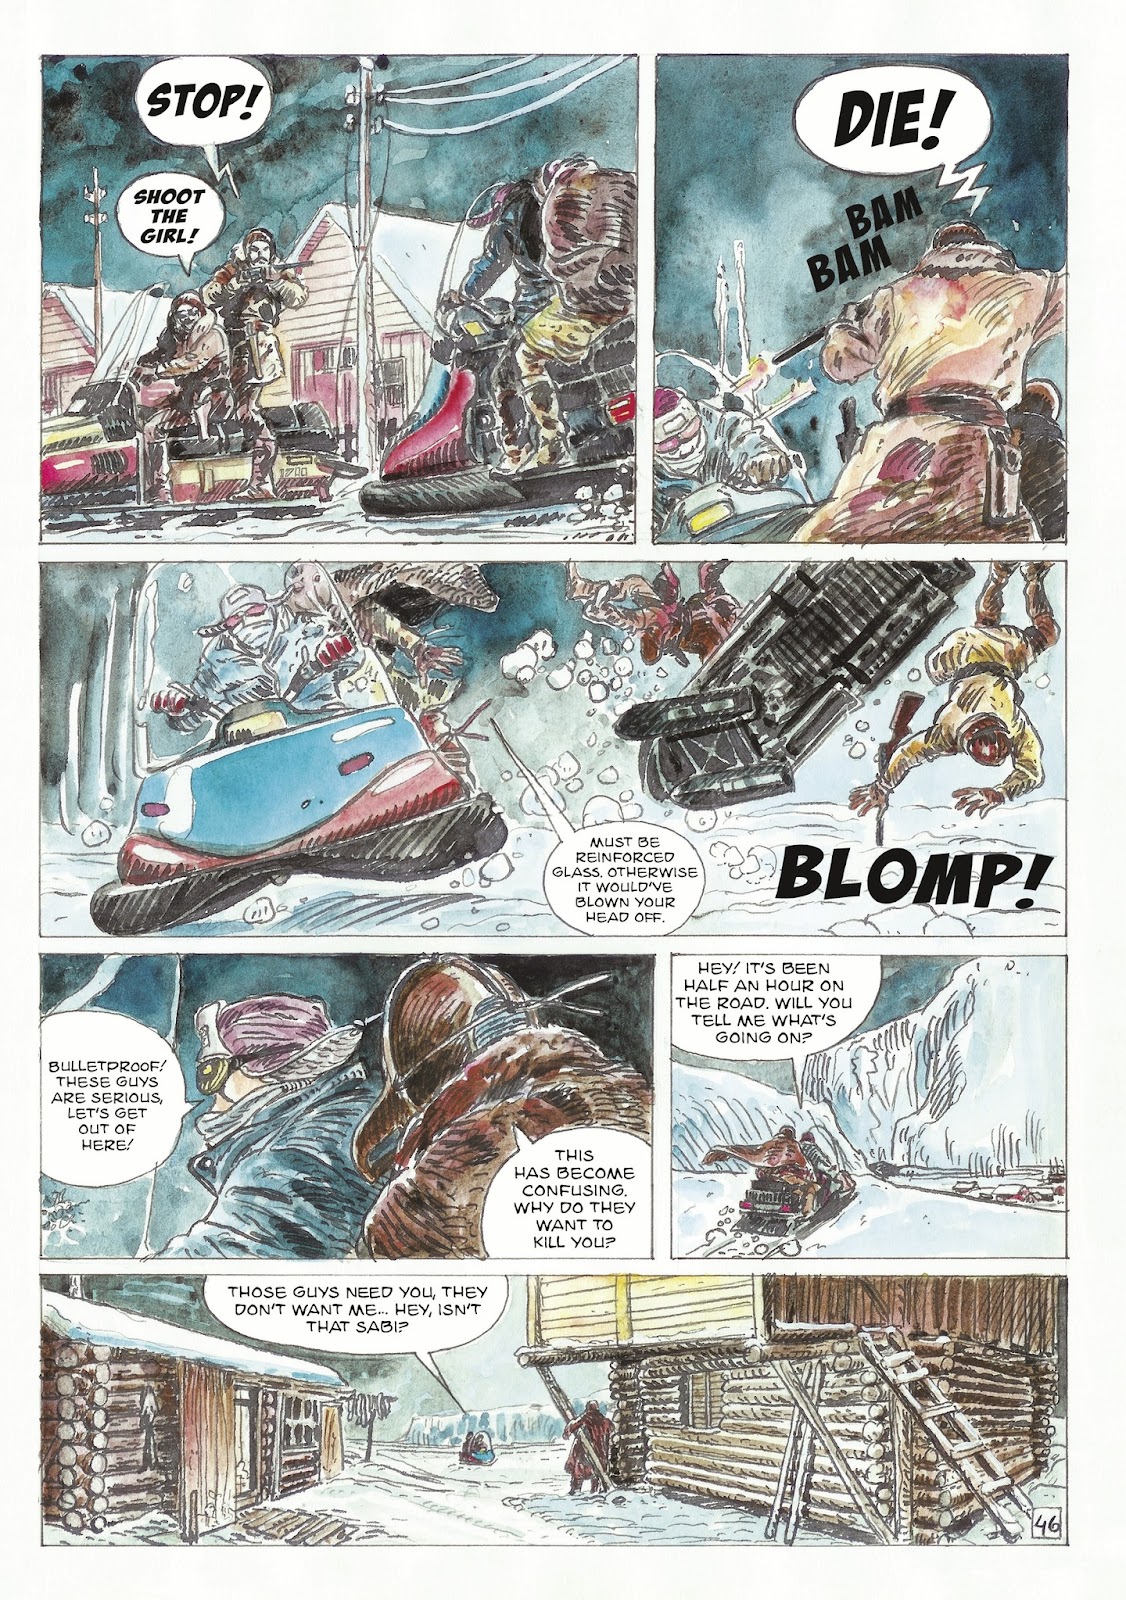 The Man With the Bear issue 1 - Page 48